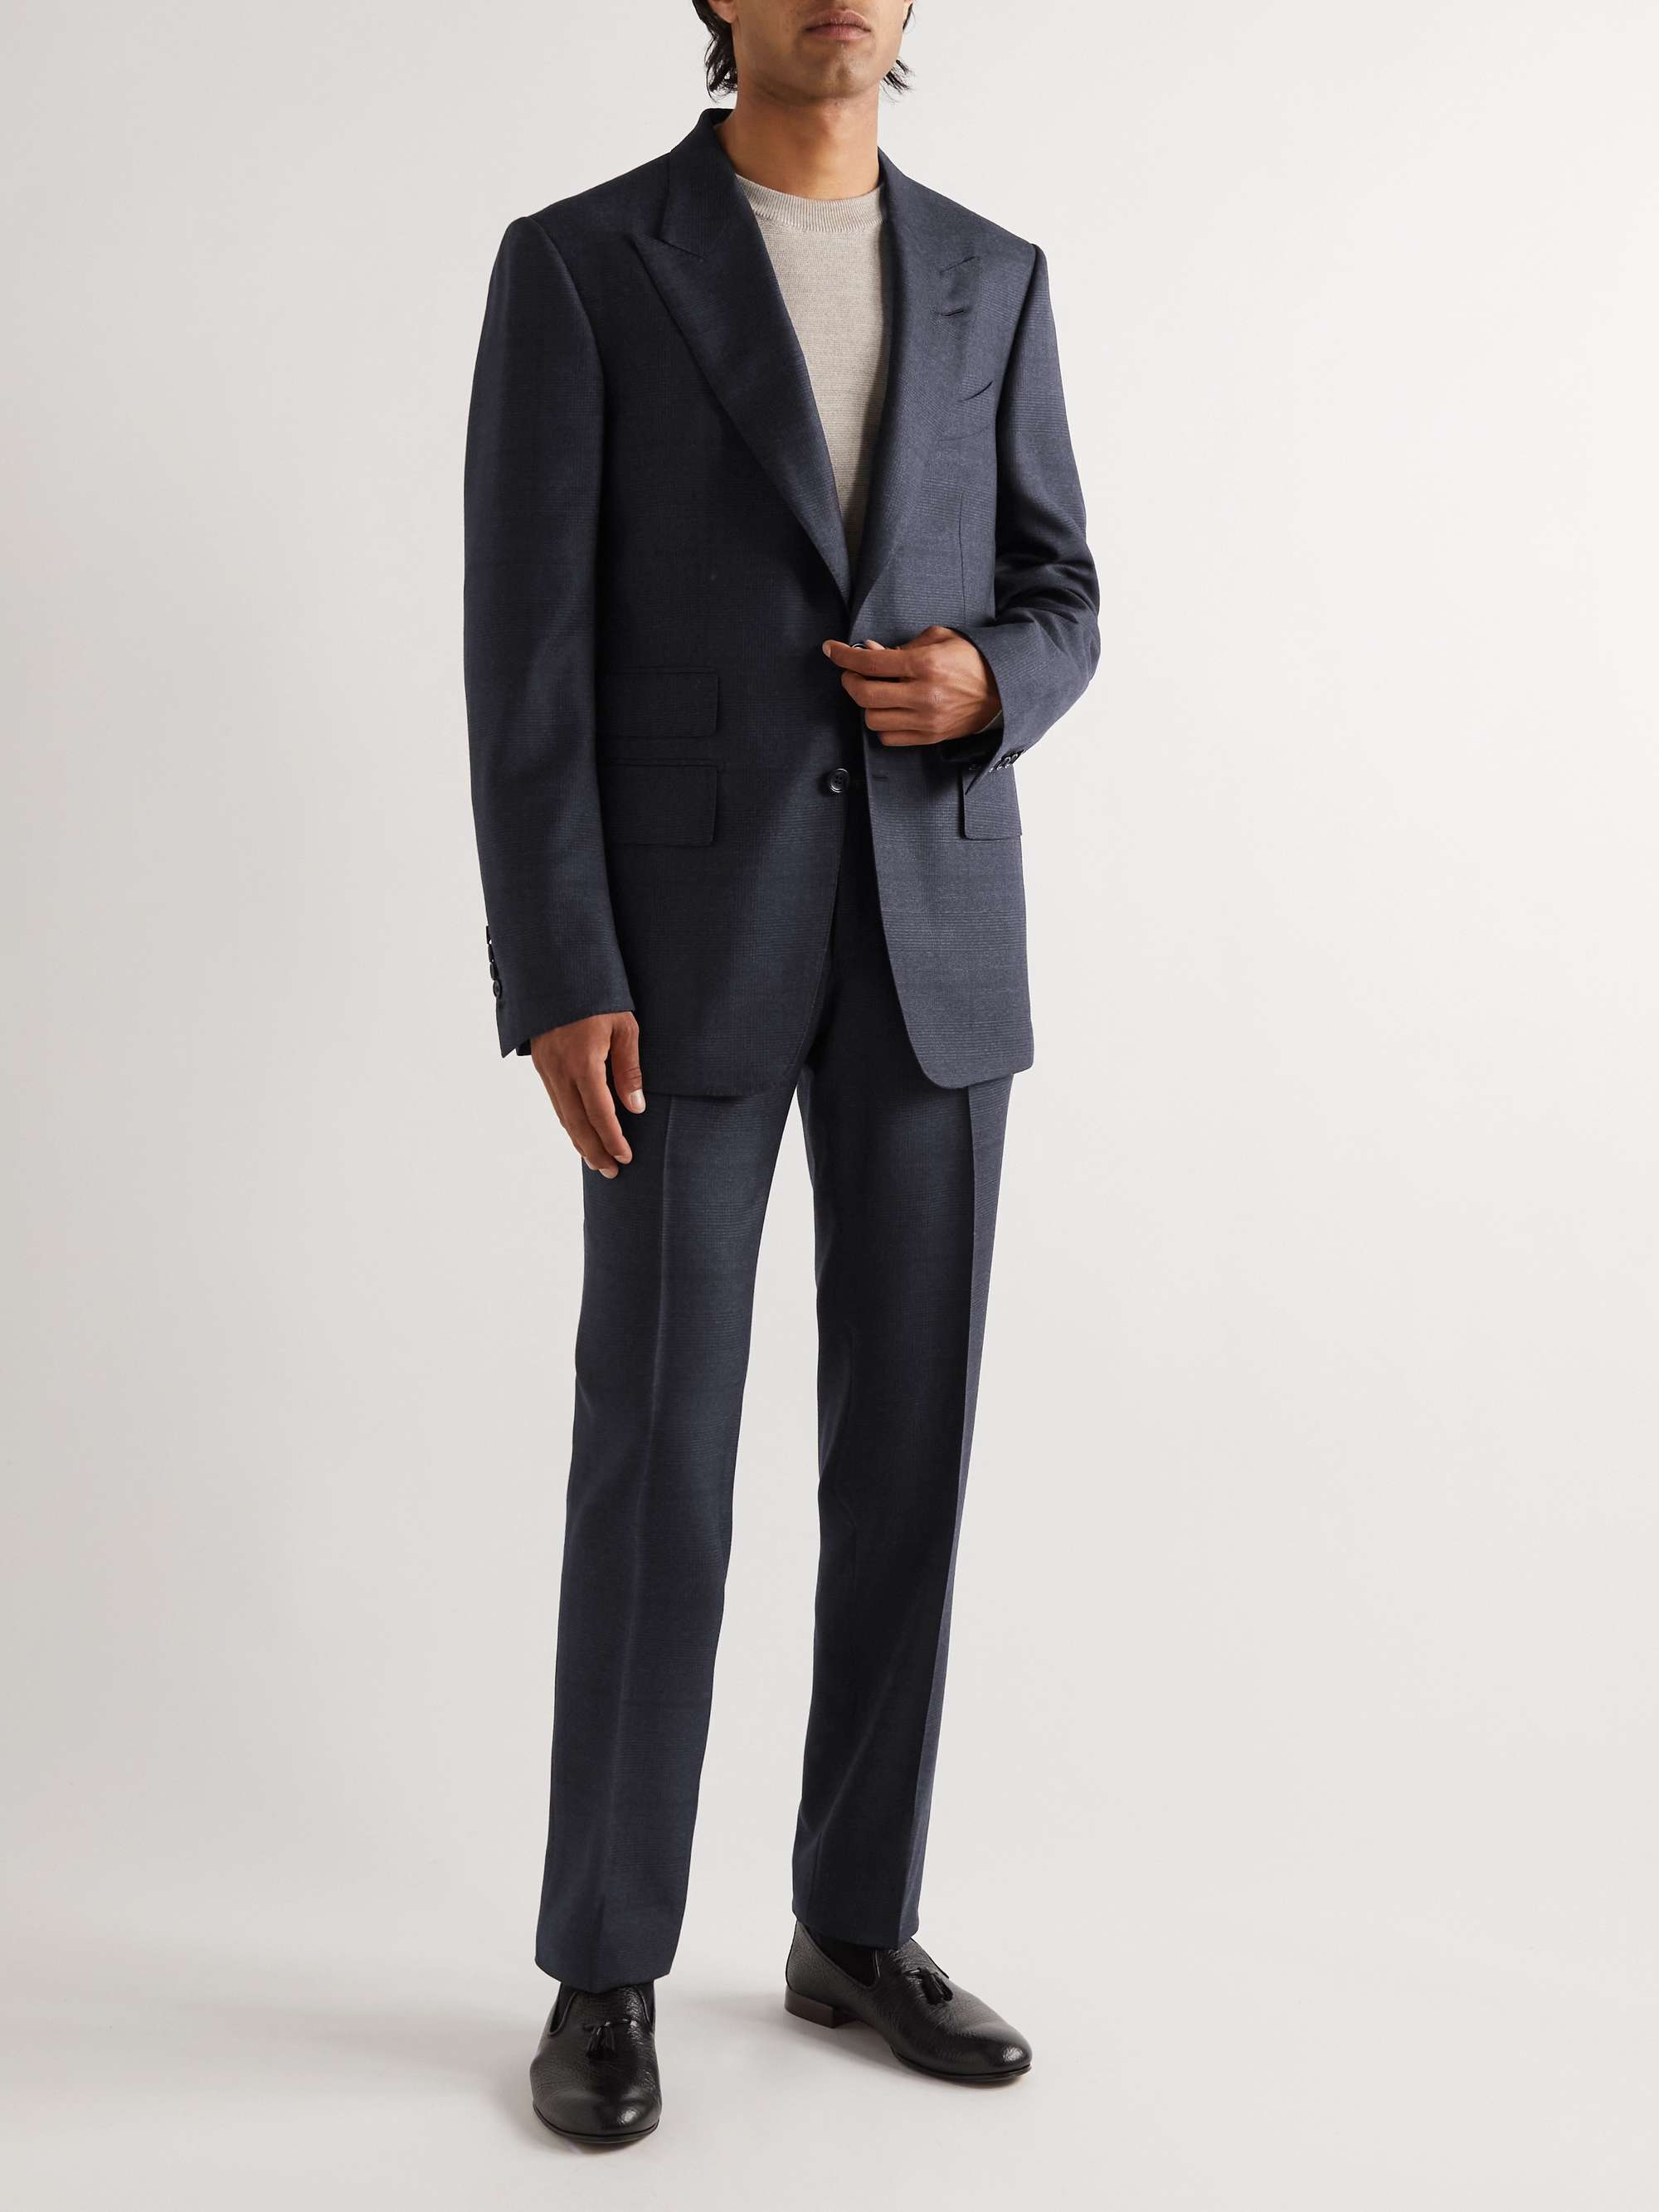 TOM FORD Slim-Fit Prince of Wales Checked Wool Suit Jacket for Men | MR  PORTER